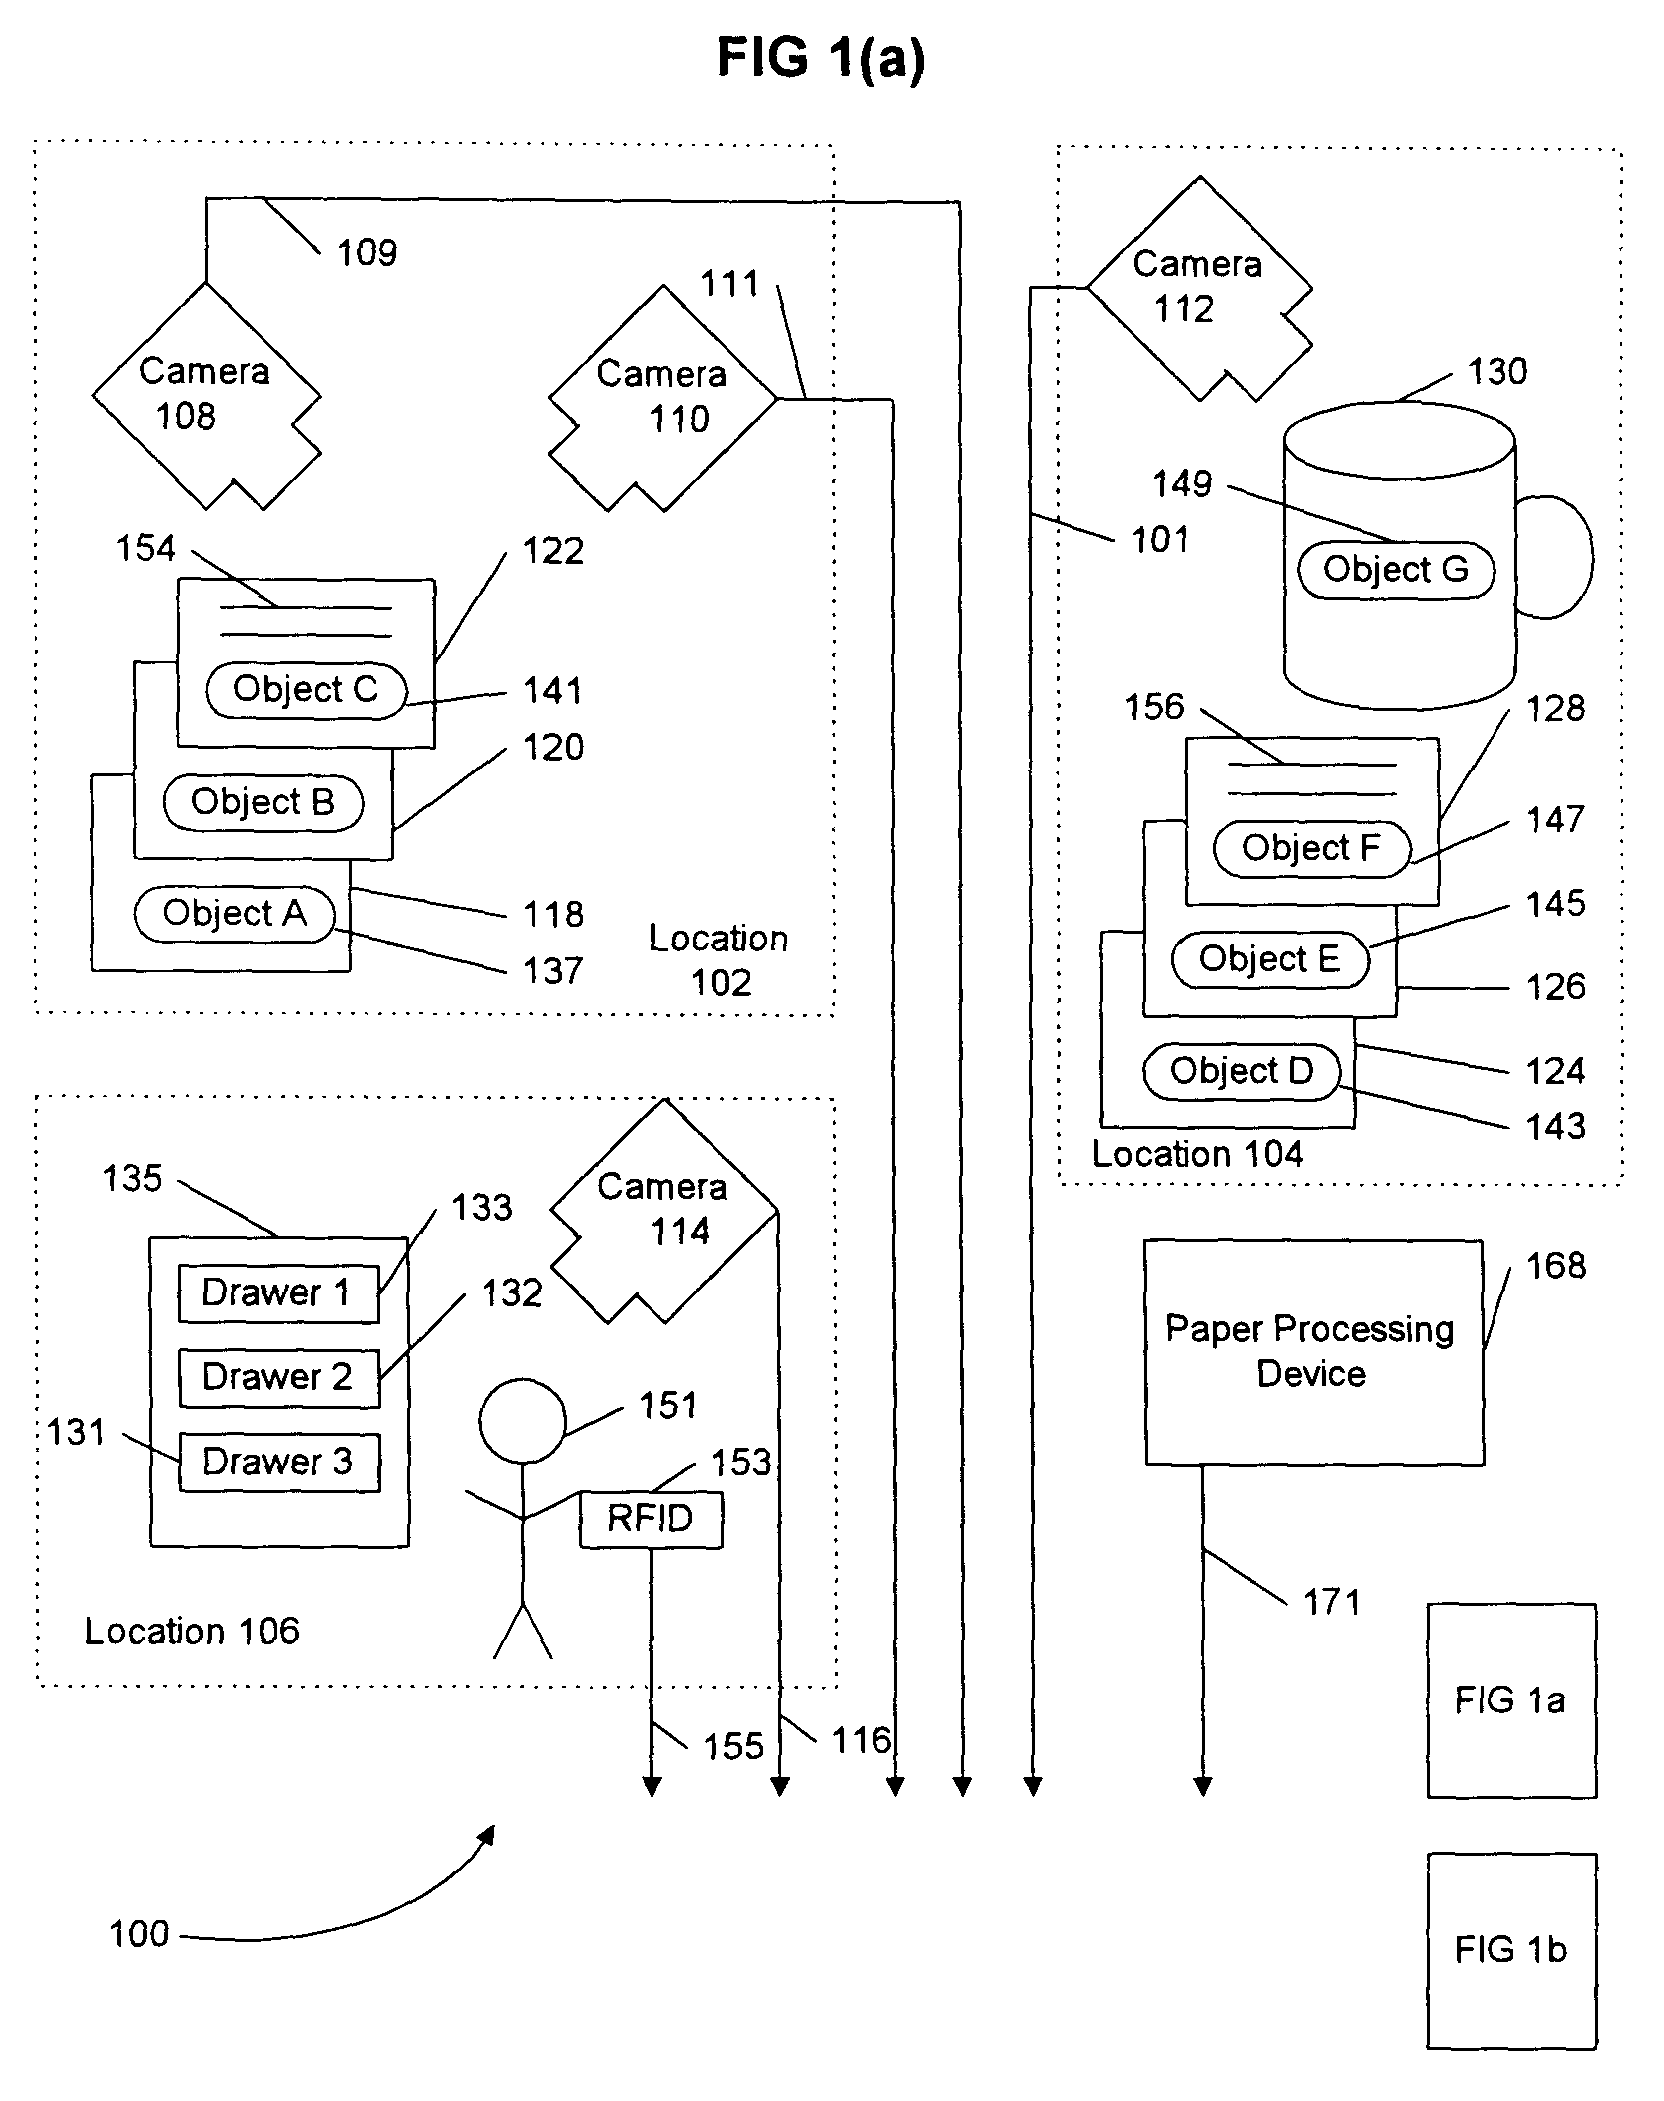 System and method for tracking positions of objects in space, time as well as tracking their textual evolution